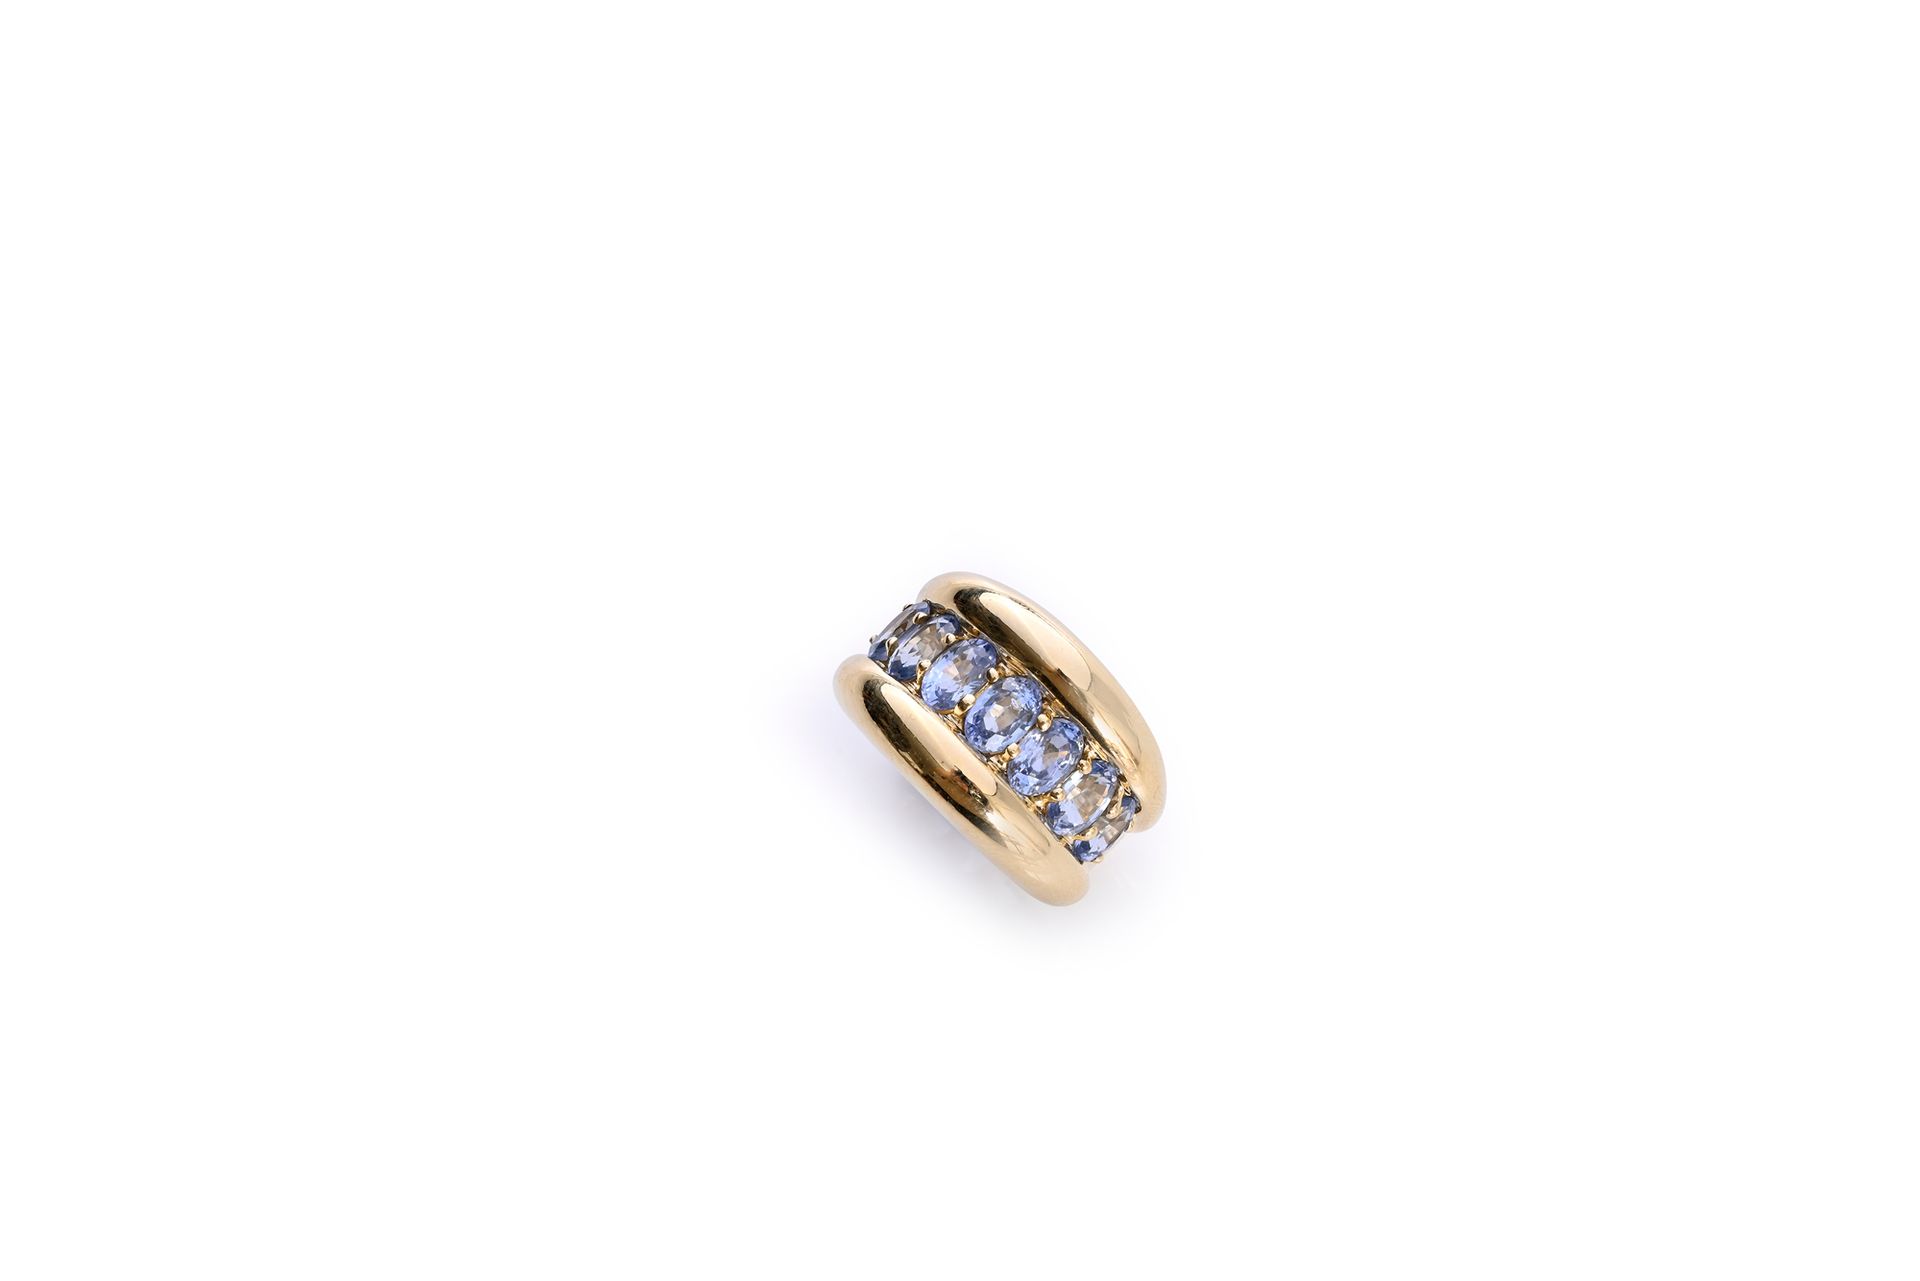 Null Band ring in 18k (750th) gold, set with 7 faceted oval light blue sapphires&hellip;